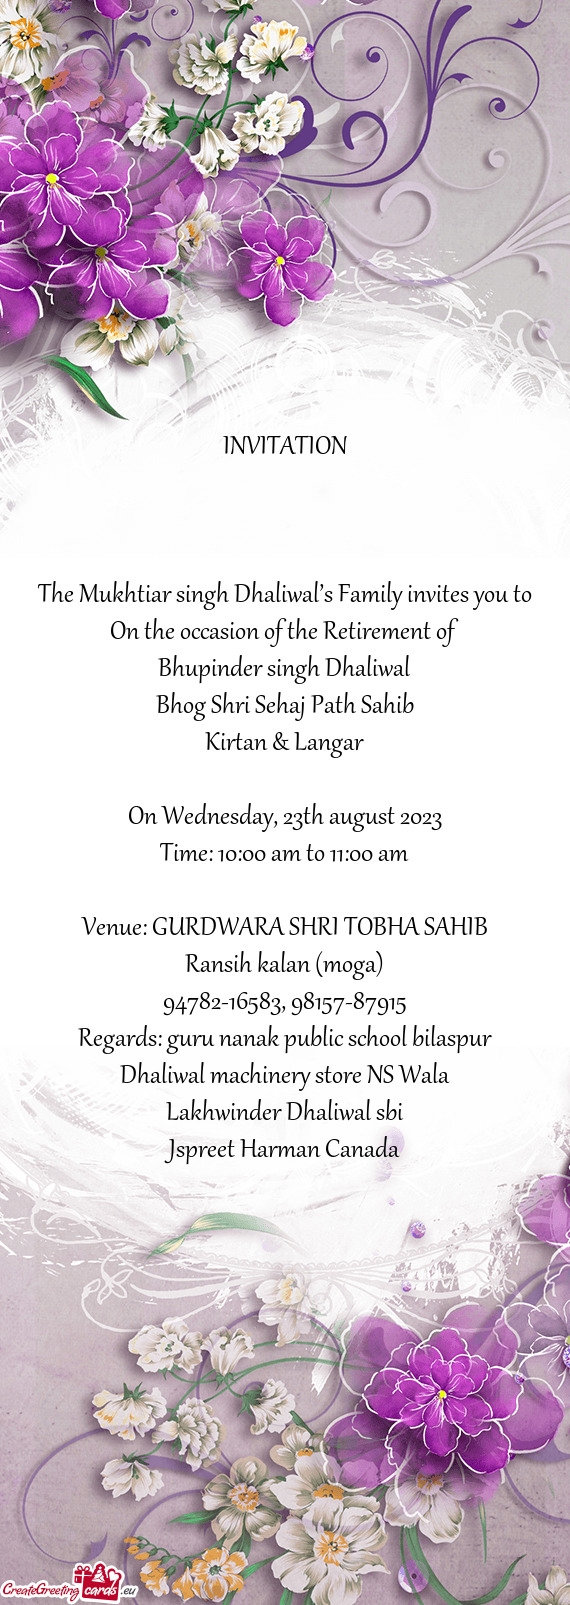 The Mukhtiar singh Dhaliwal’s Family invites you to